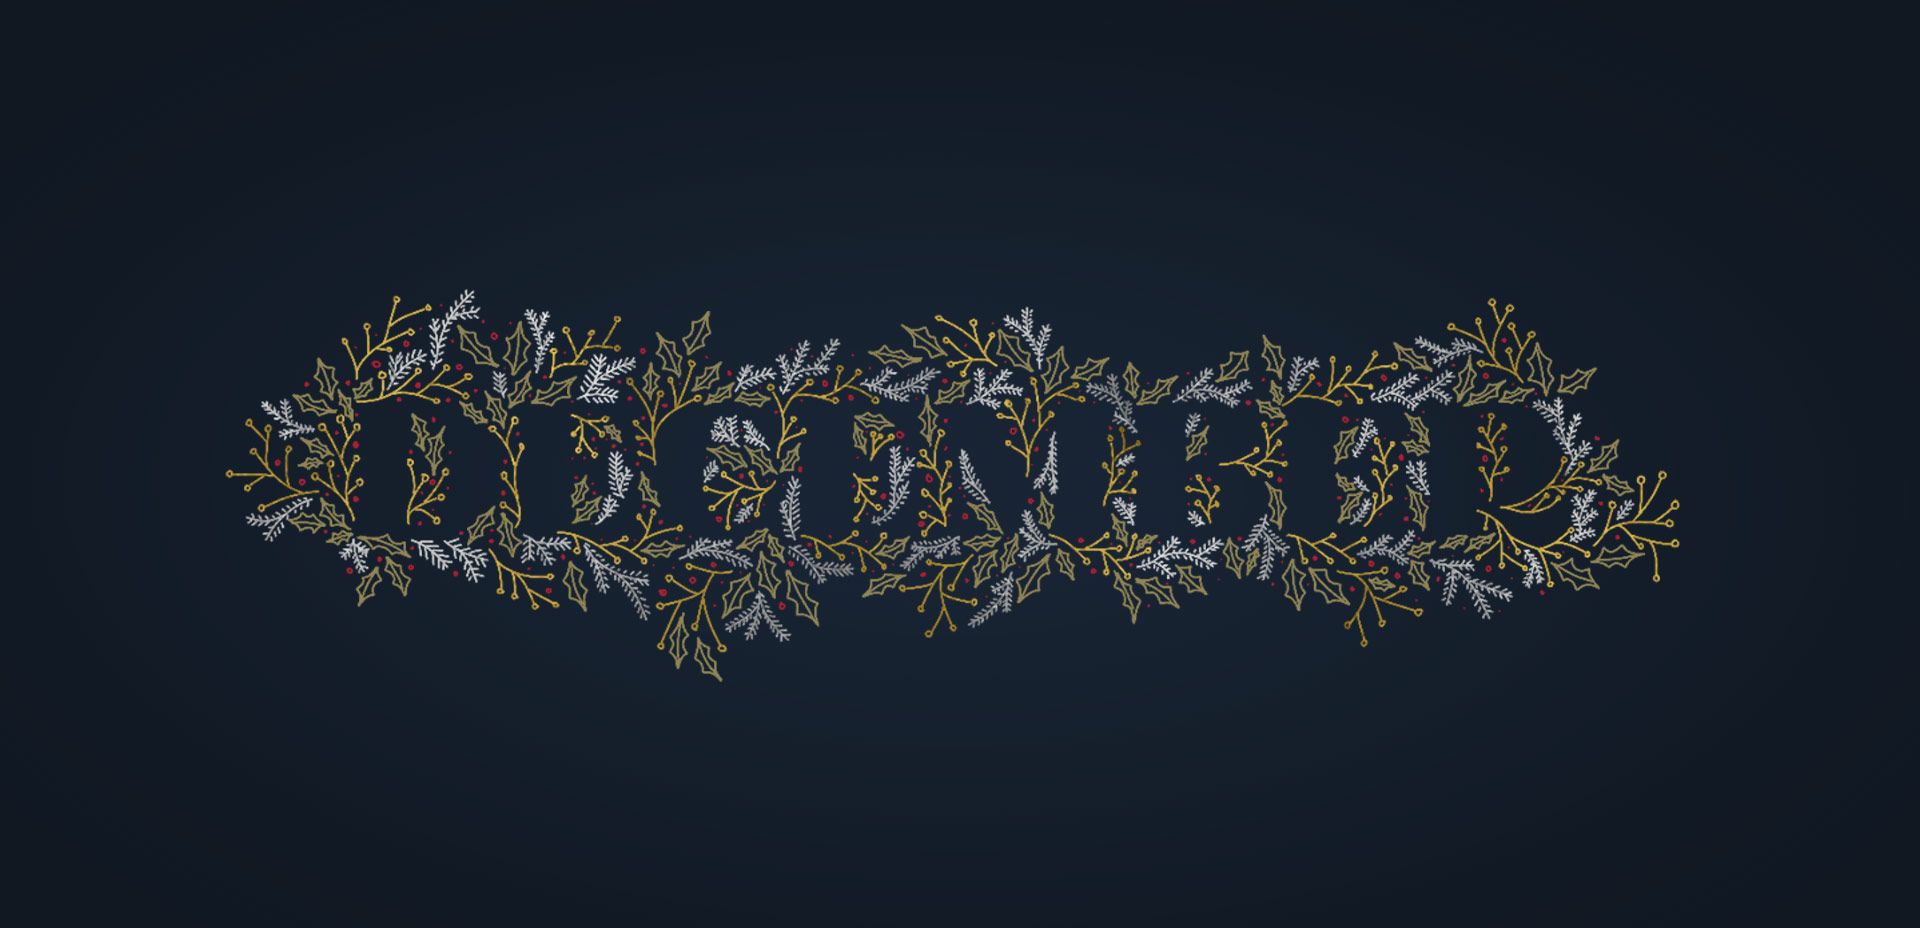 Embroidery of the word December - December